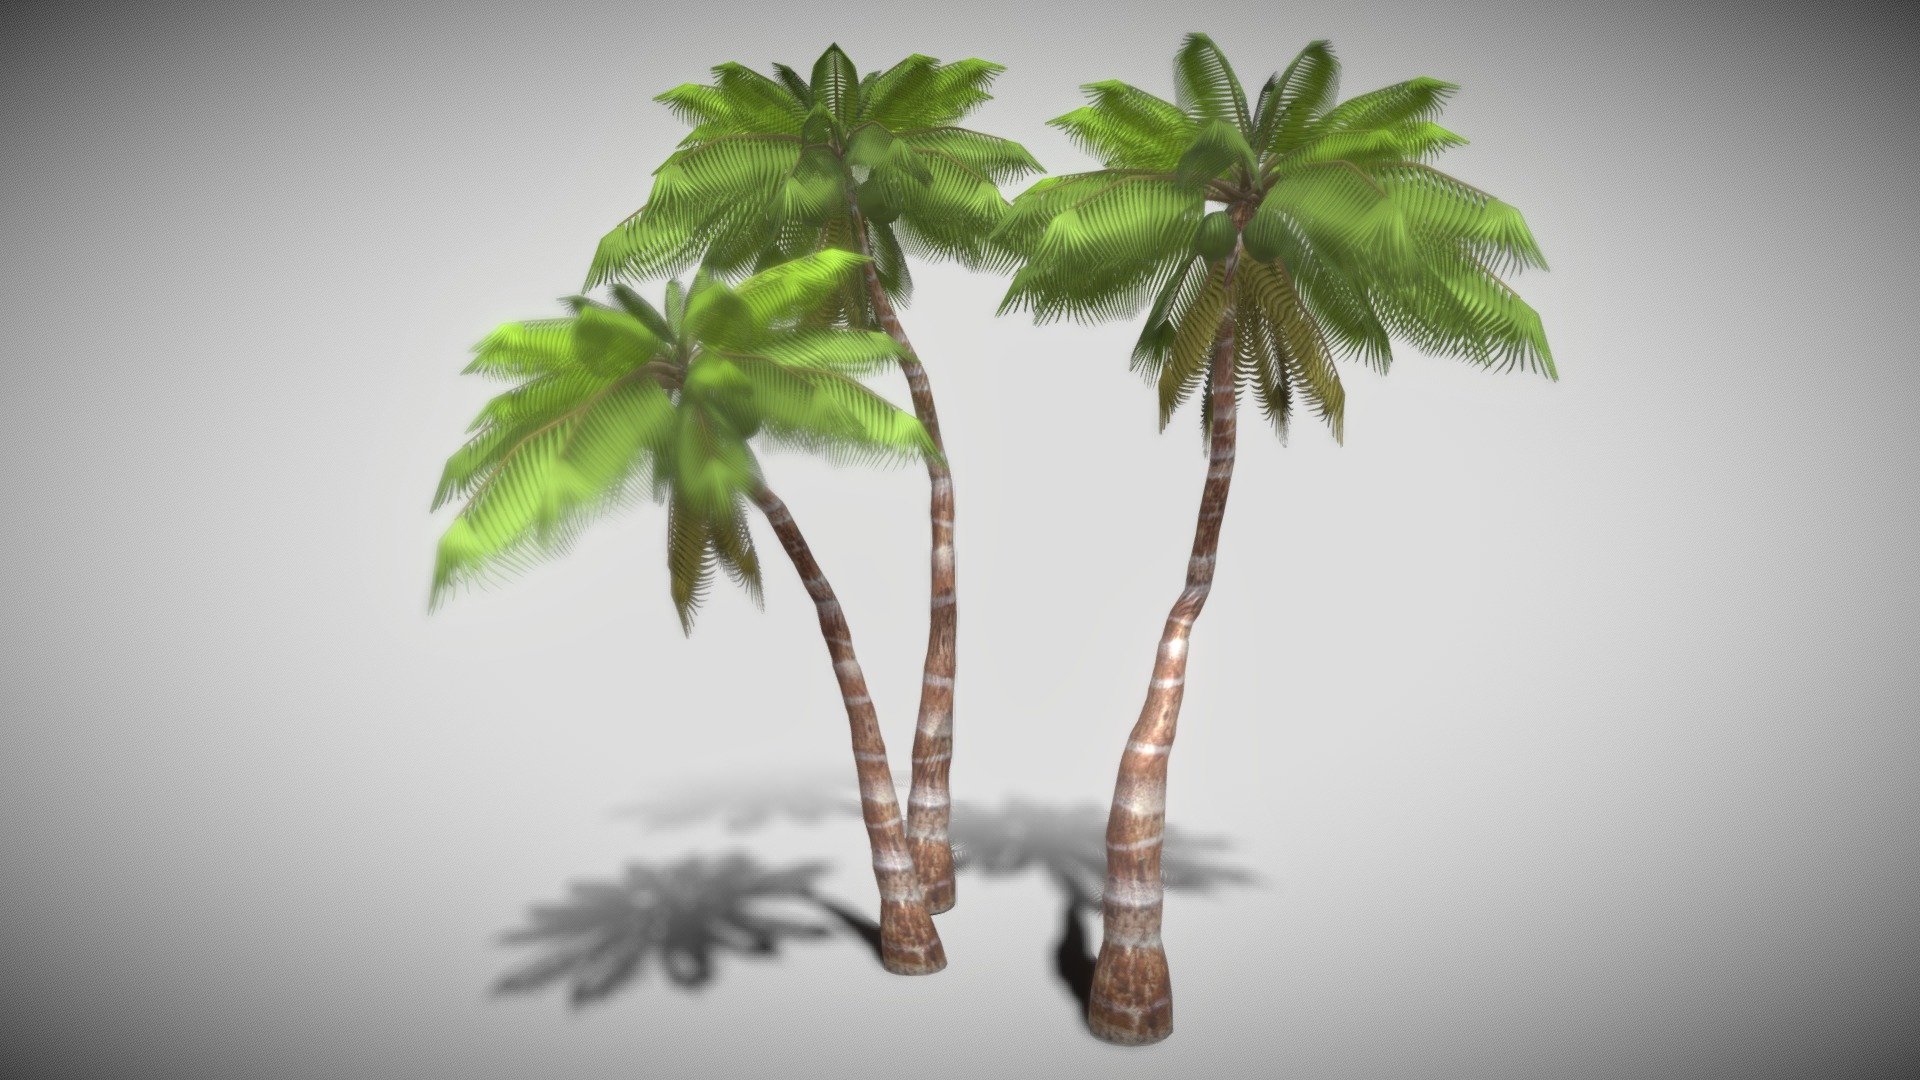 You’ll get

FBX

contact me if you wanted to make custom model

htrinurcahyo@gmail.com

im from INDONESIA - Coconut Tree - 3D model by ubnilluminati 3d model